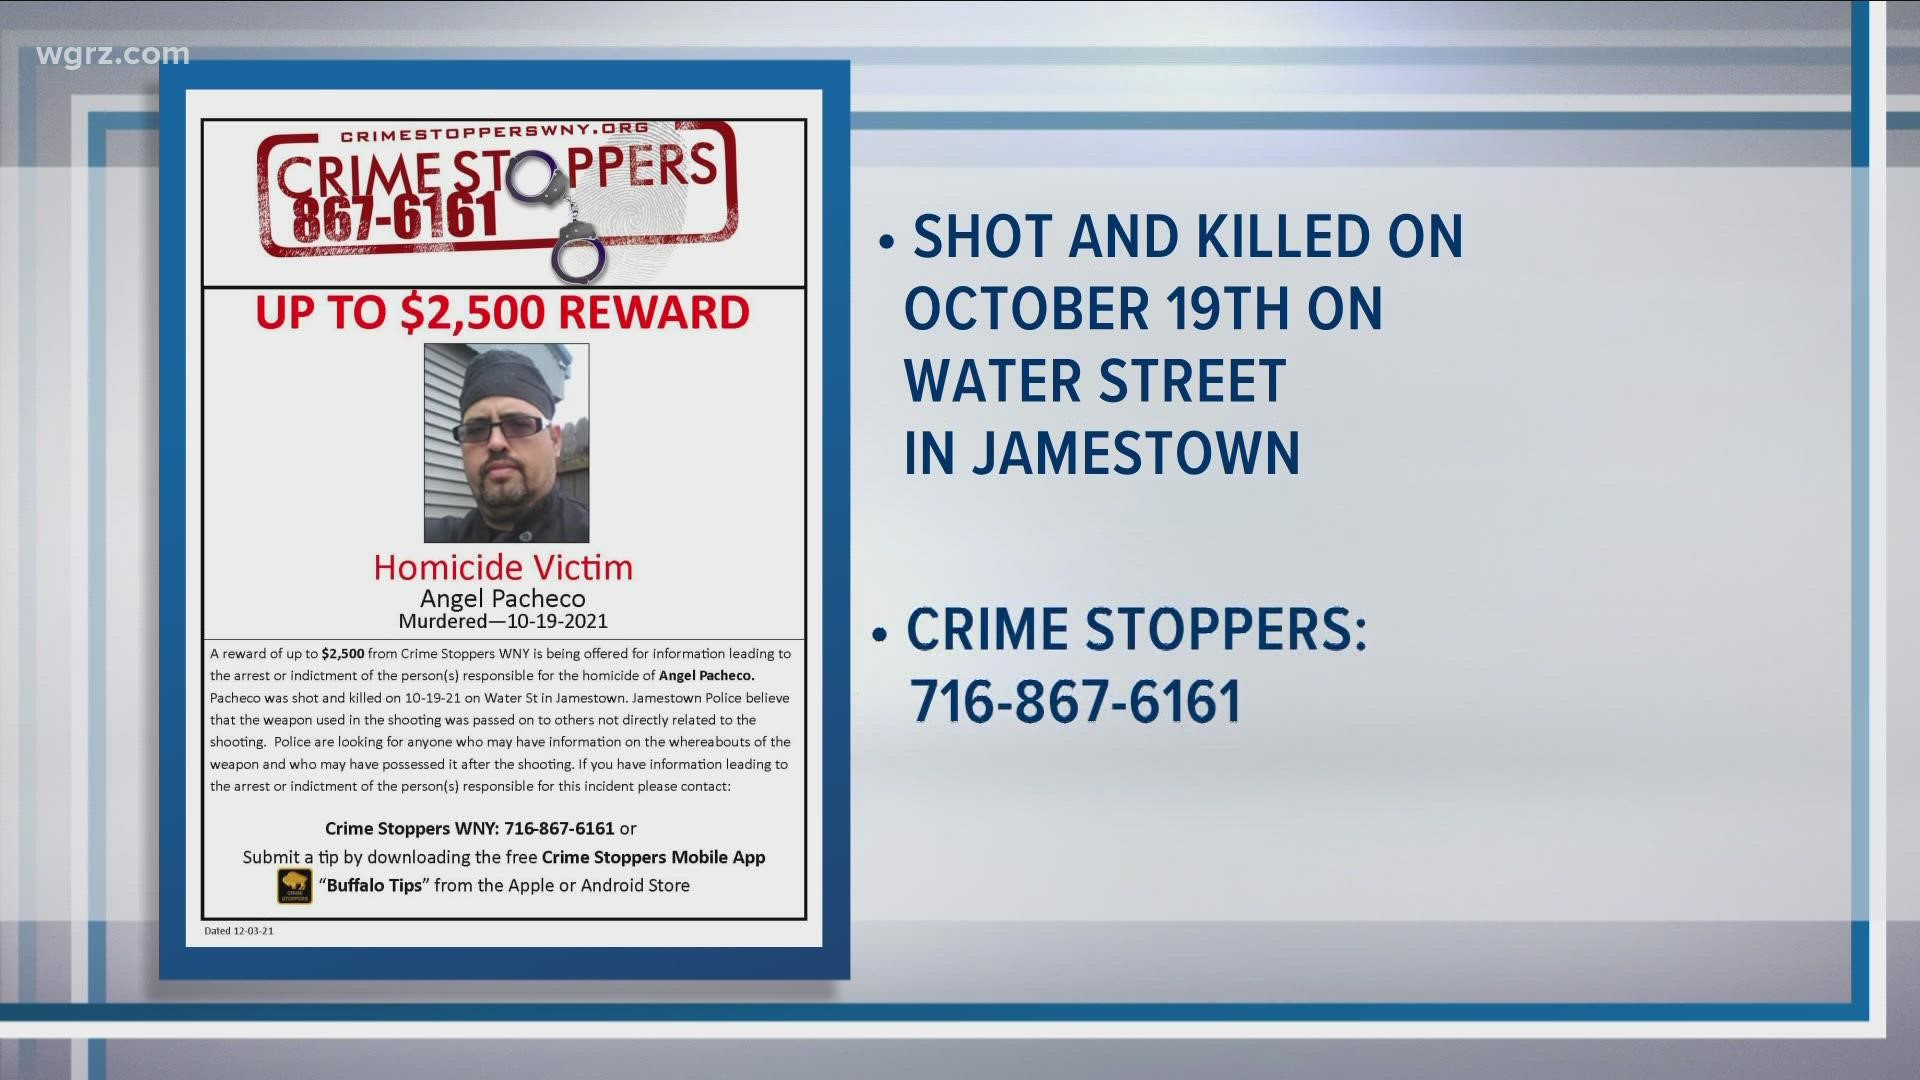 Western New York Crime Stoppers is now offering a $2500 reward for information about the Angel Pacheco homicide.